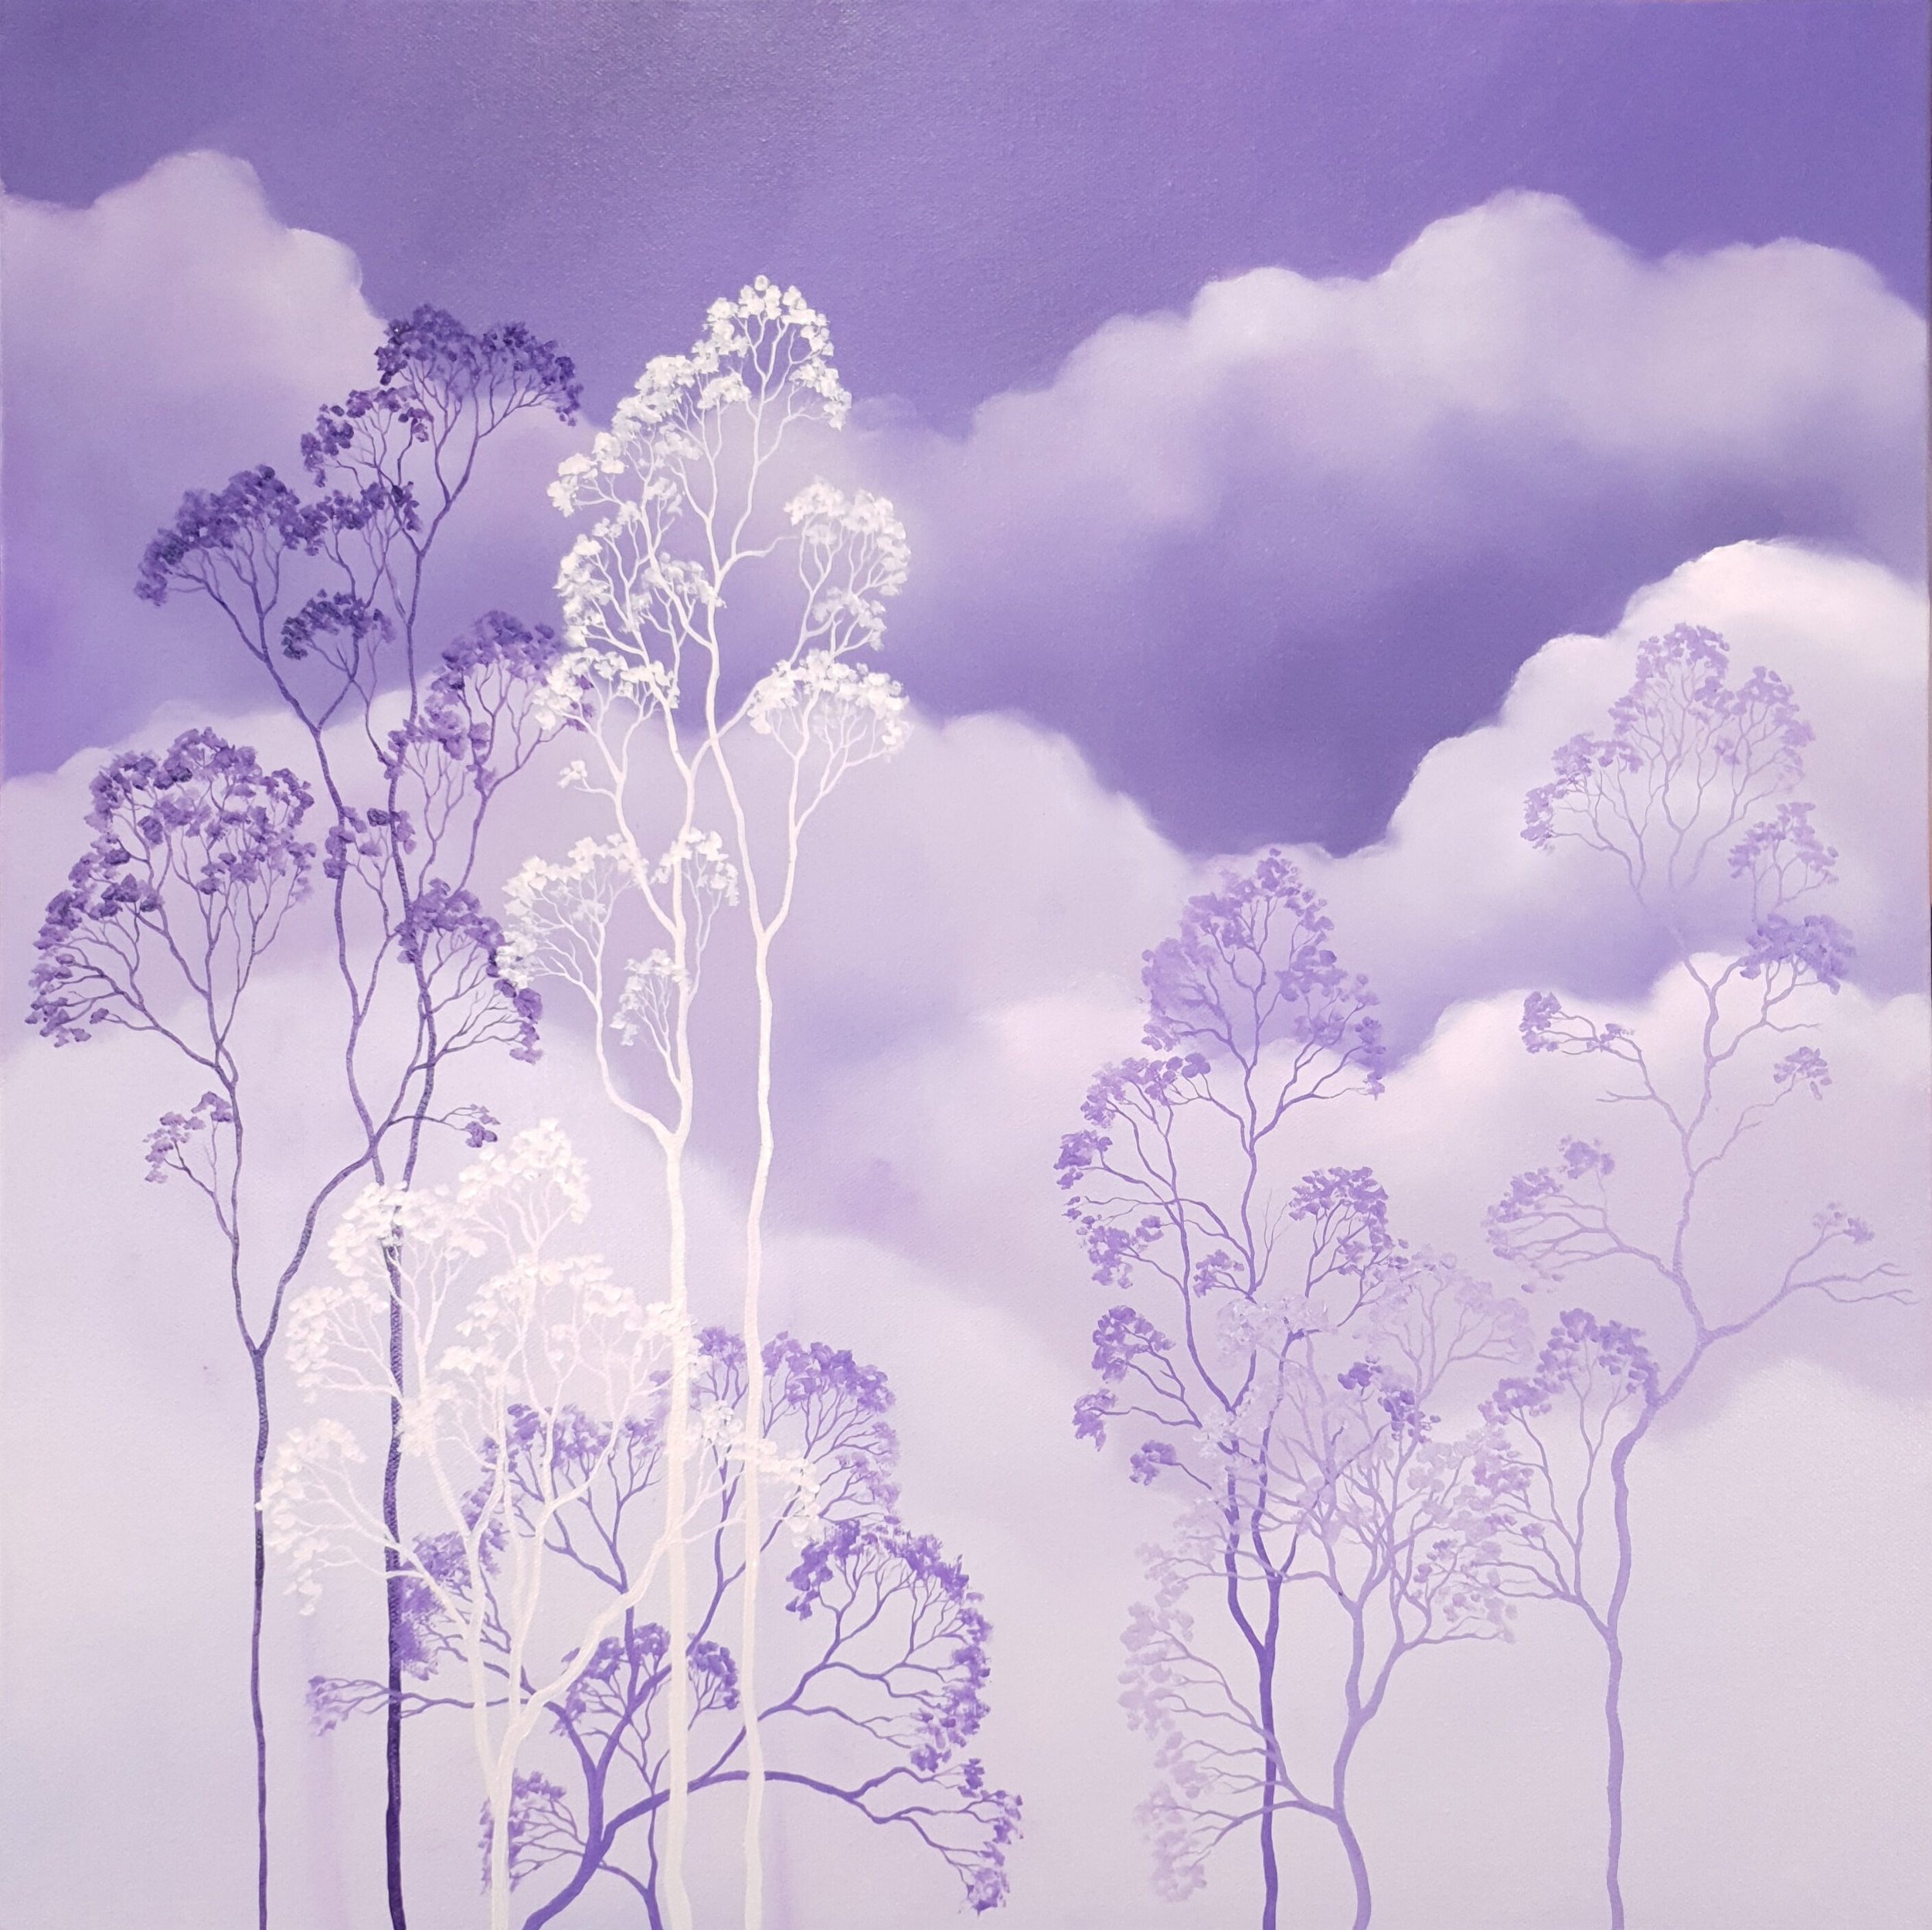 &ldquo;Violet Skies&rdquo; by Lucinda Leveille - 64x64cm oil on canvas with timber floating frame - $850⁣ @lucindaleveilleart 
⁣
Available to purchase at the gallery or on website link in bio ⁣
⁣
 #featureartist #artcollector #landscapesexhibition #l